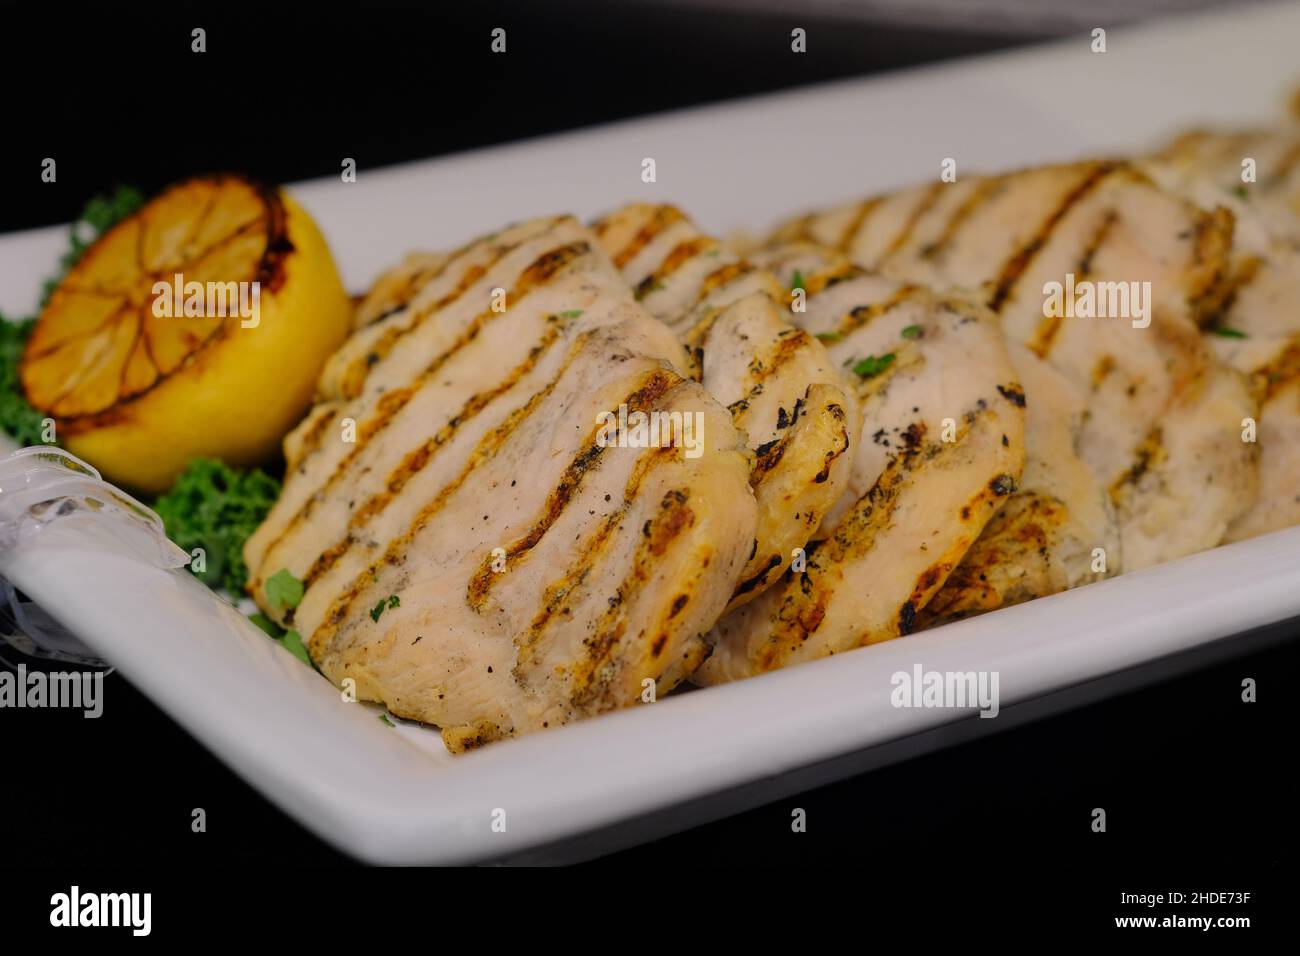 Barbecue chicken with grill marks on retail display at local market Stock Photo